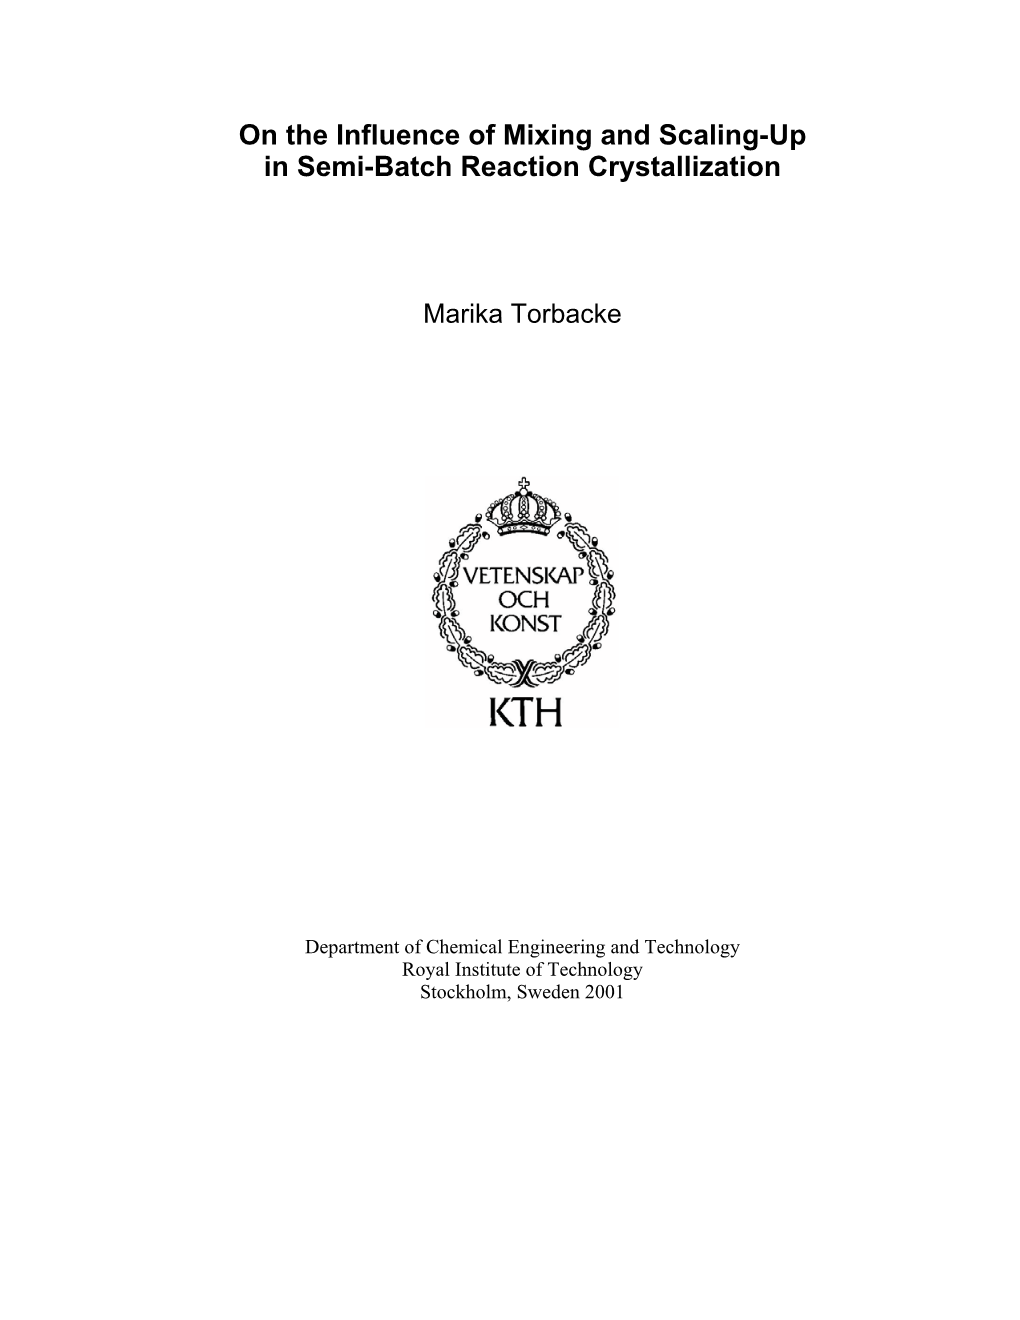 On the Influence of Mixing and Scaling-Up in Semi-Batch Reaction Crystallization